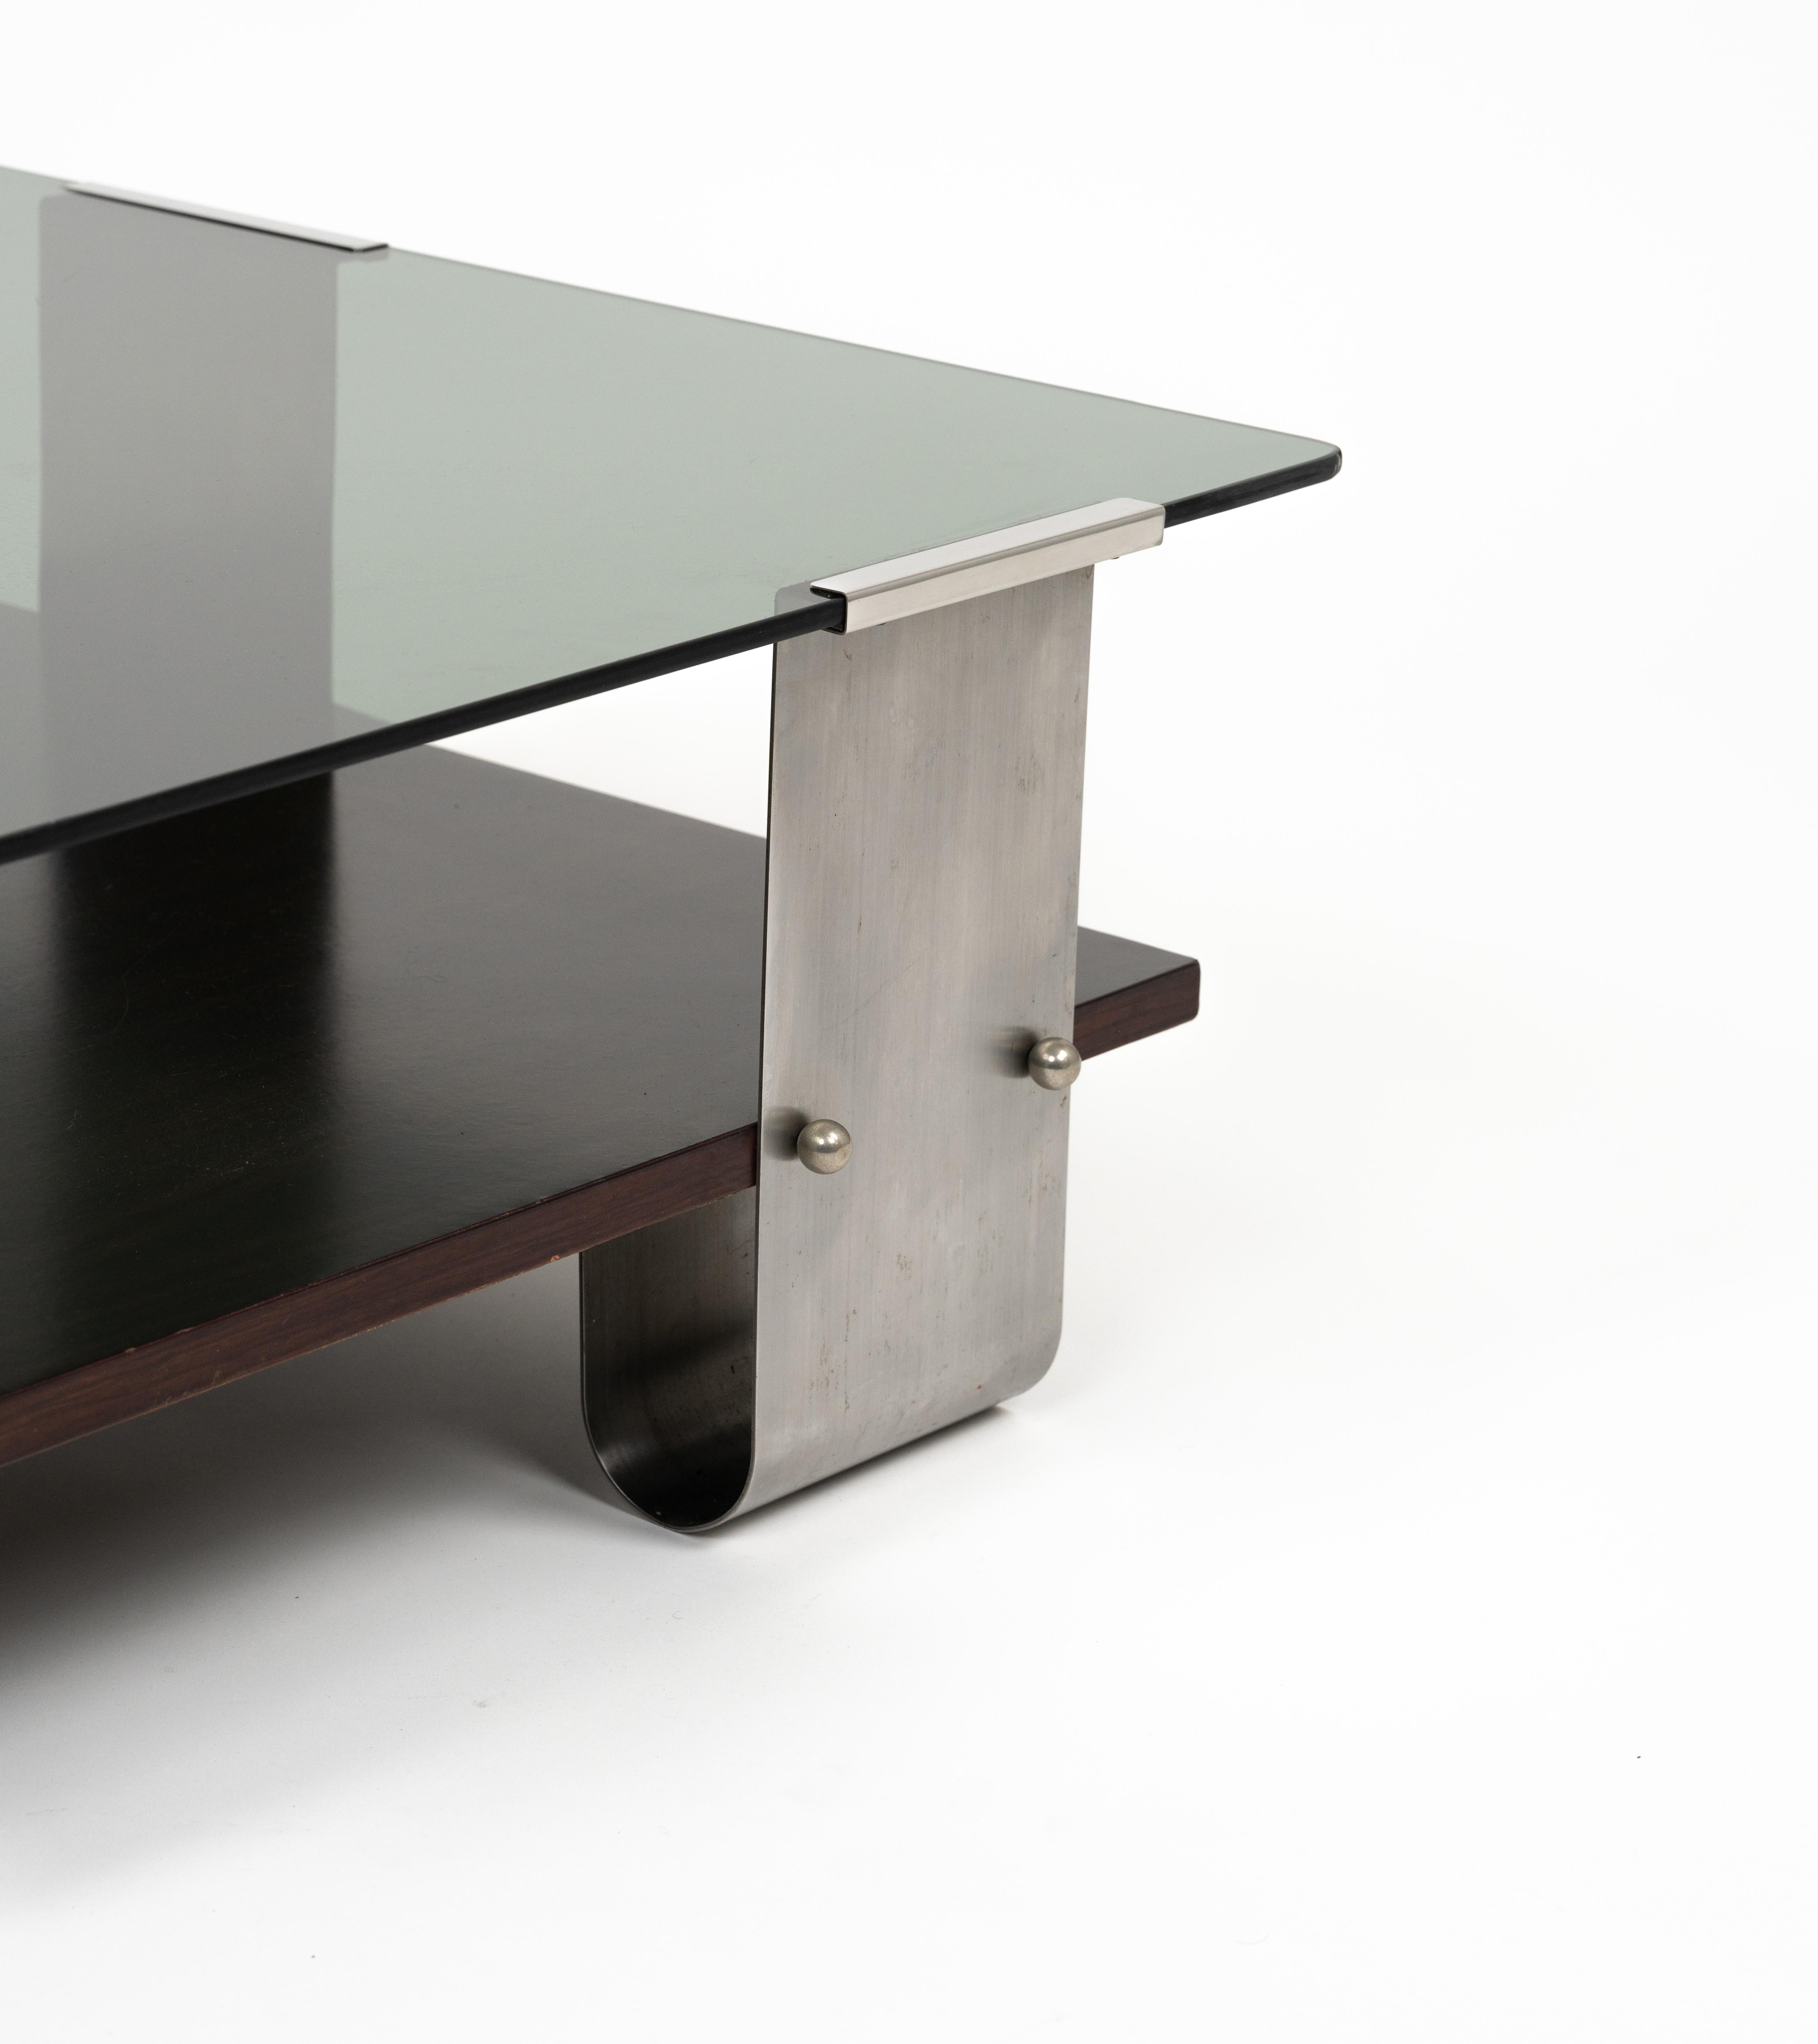 Midcentury Coffee Table in Steel, Wood & Glass by Francois Monnet, France, 1970s For Sale 7